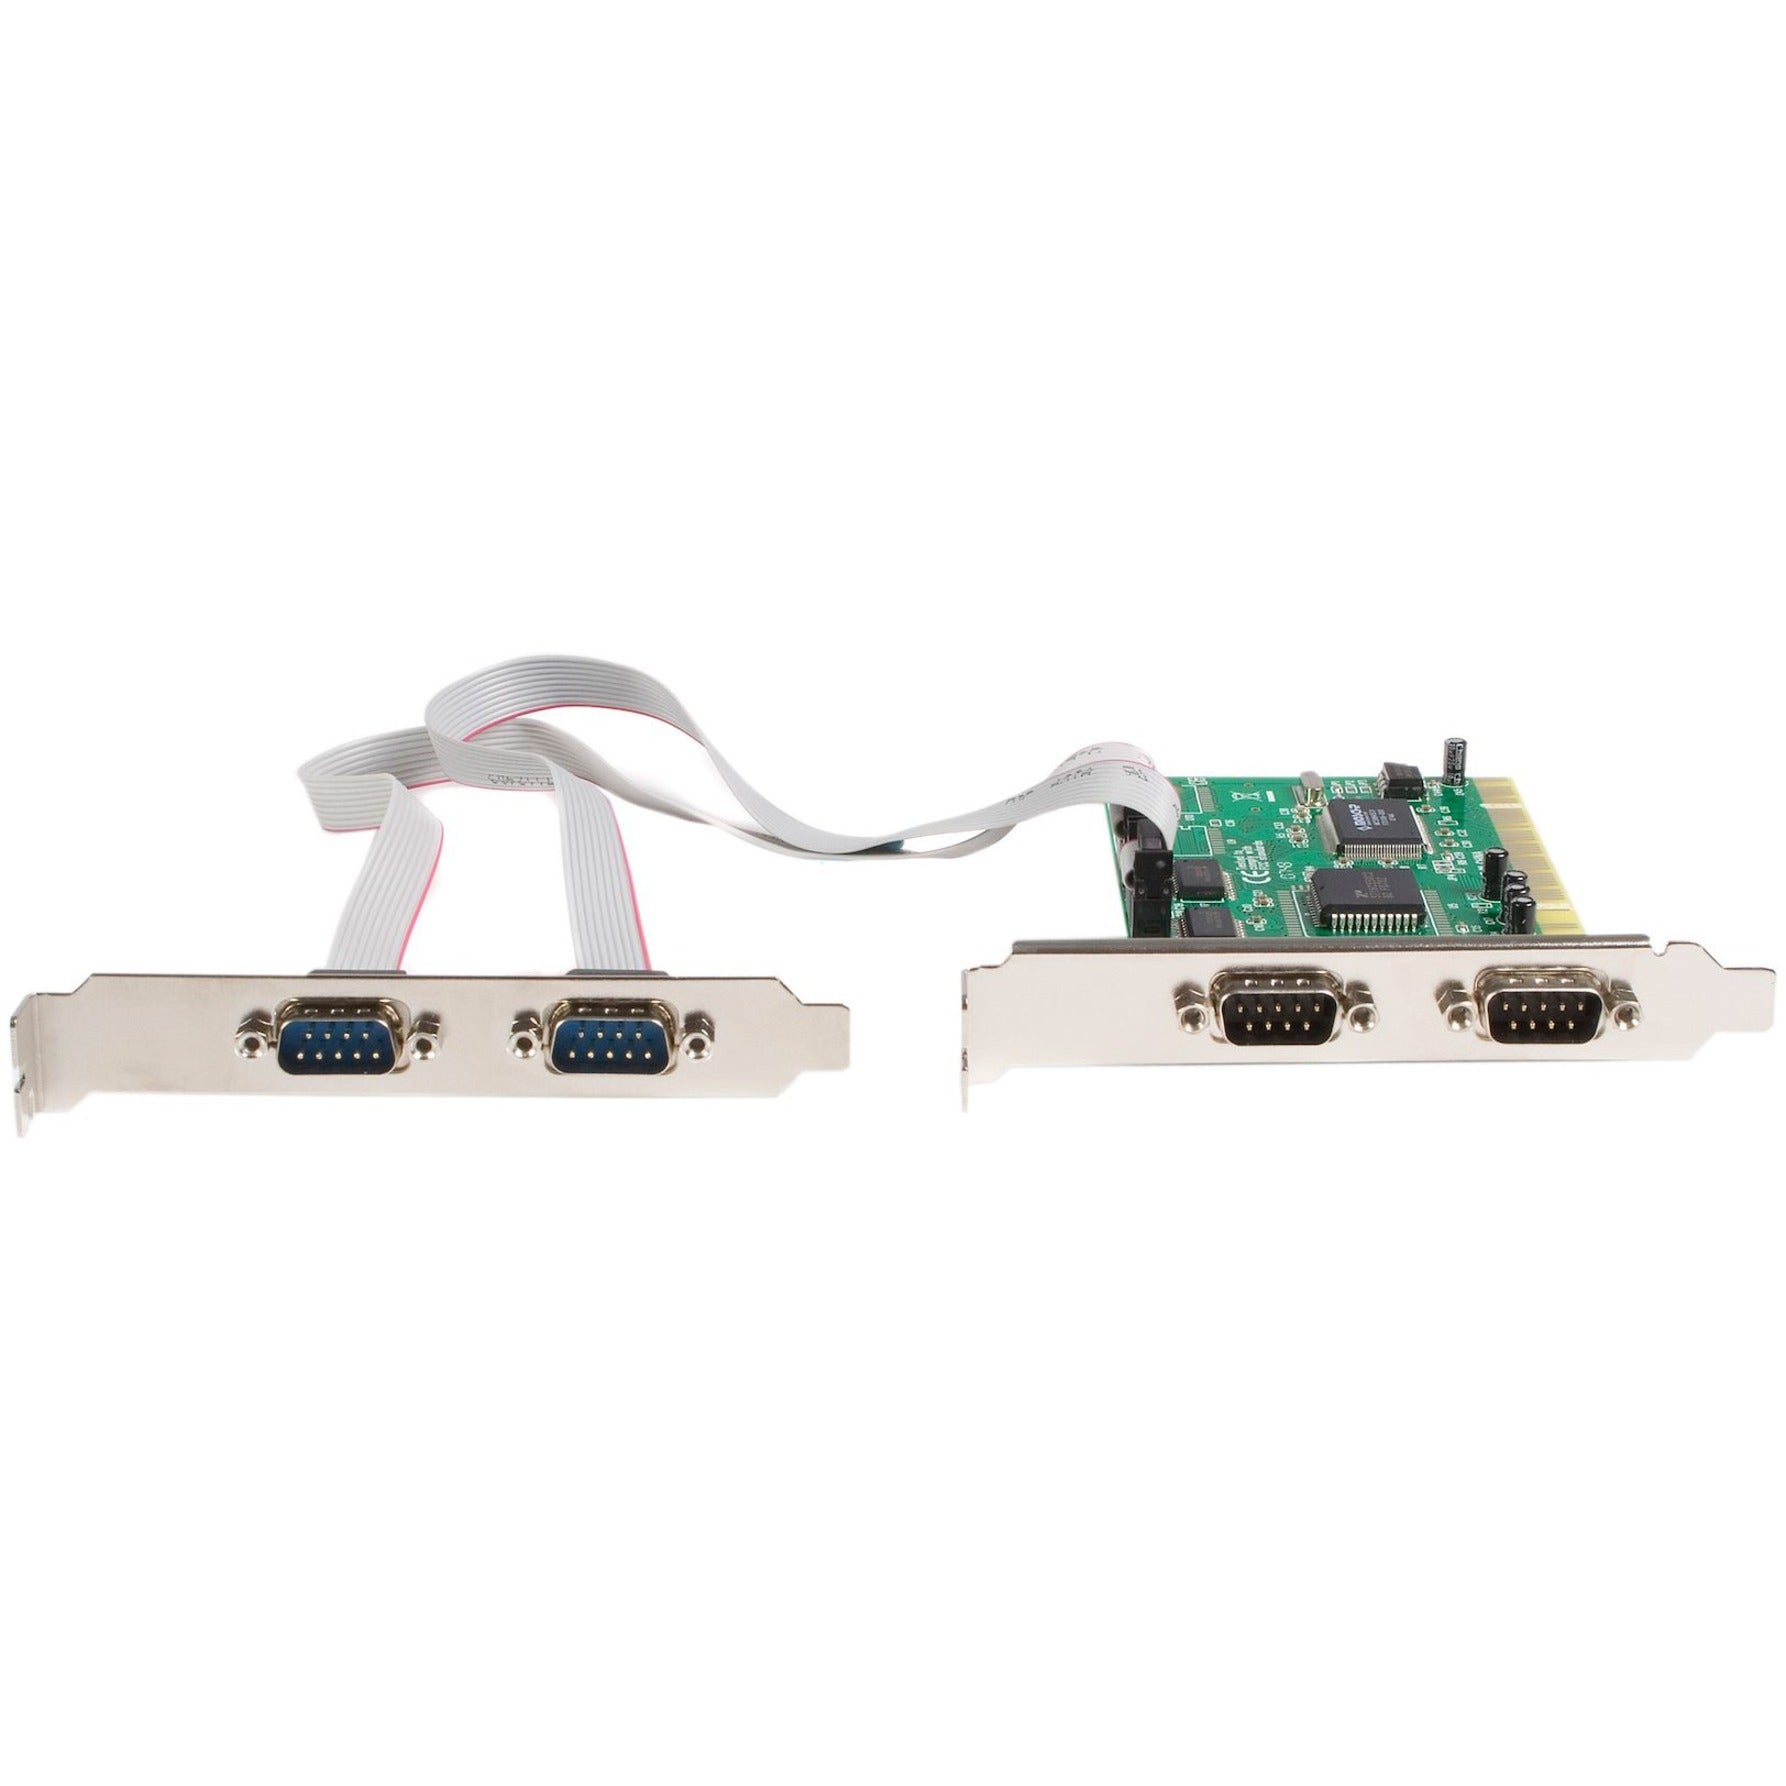 StarTech.com PCI4S550N 4 Port PCI RS232 Serial Adapter Card with 16550 UART, Plug and Play, Windows & Linux Compatible